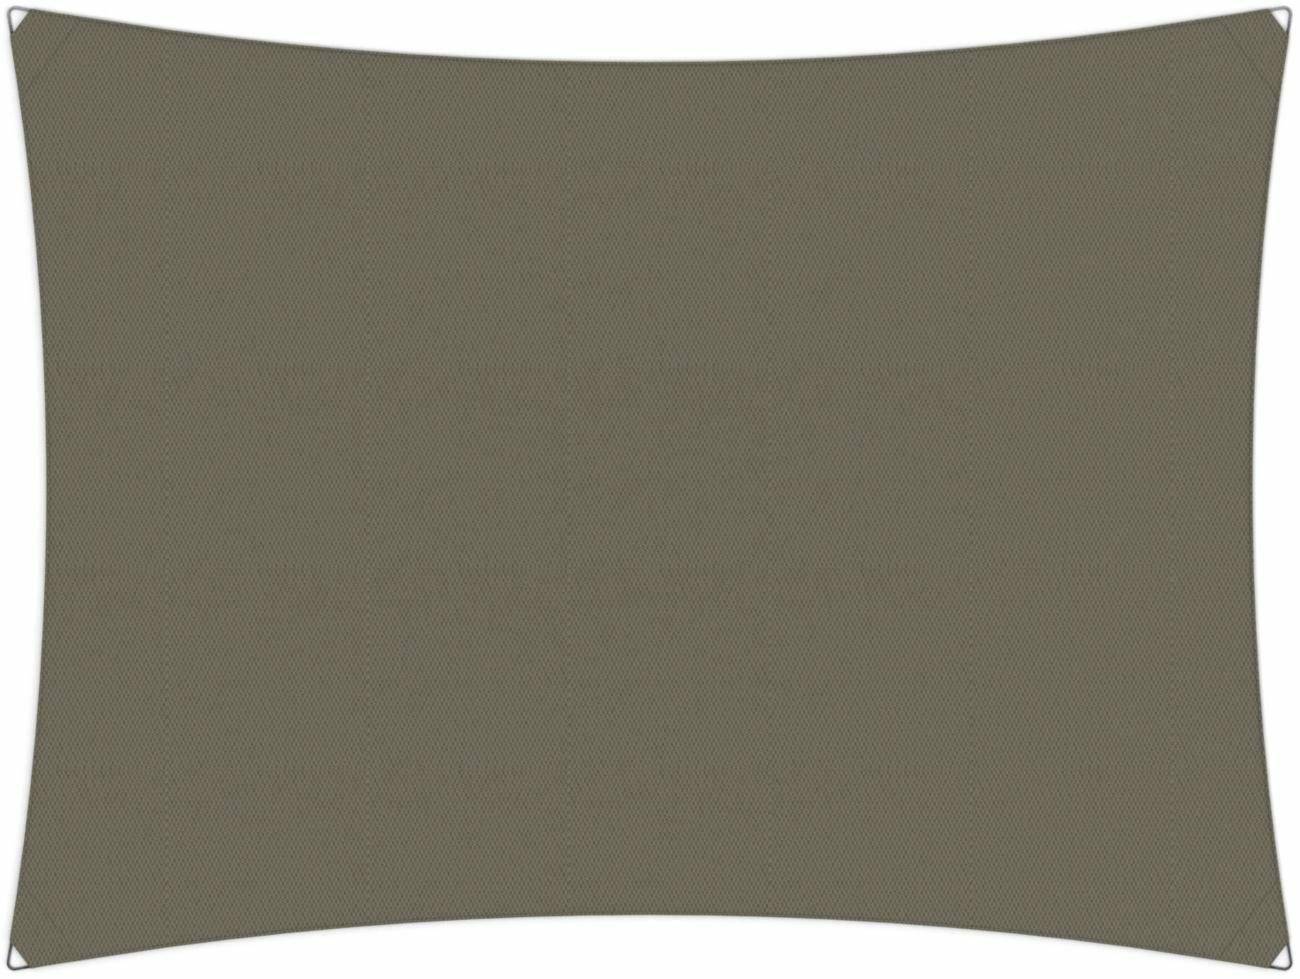 Ingenua shade sail Rectangle 5 x 4 m, for outdoor use. Colour of the fabric shade sail Taupe.